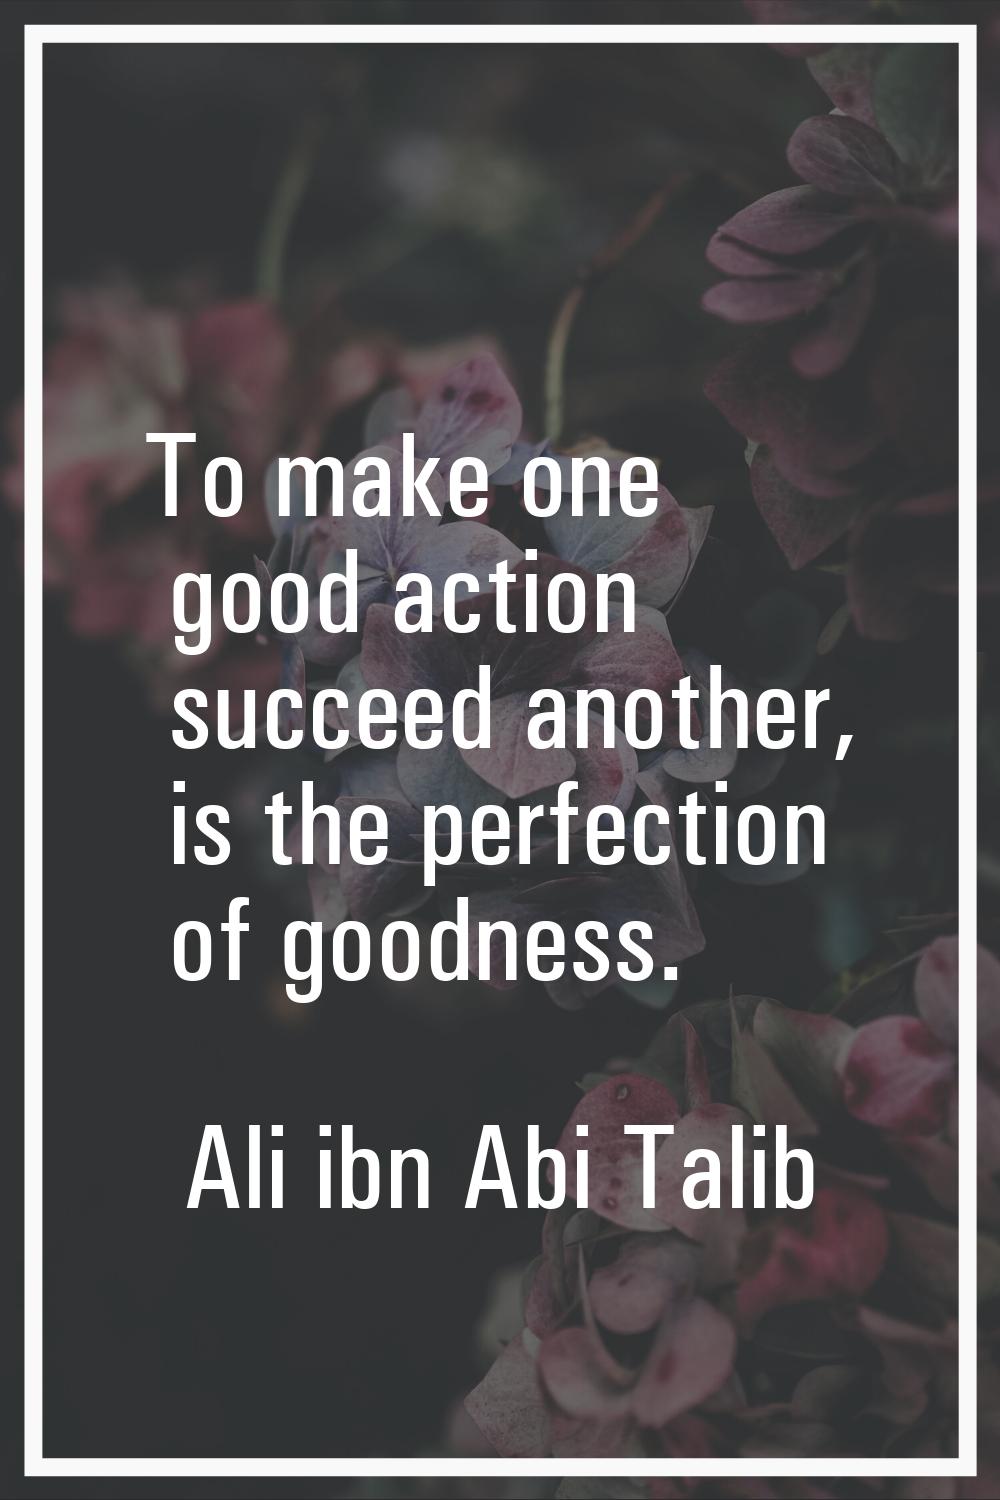 To make one good action succeed another, is the perfection of goodness.